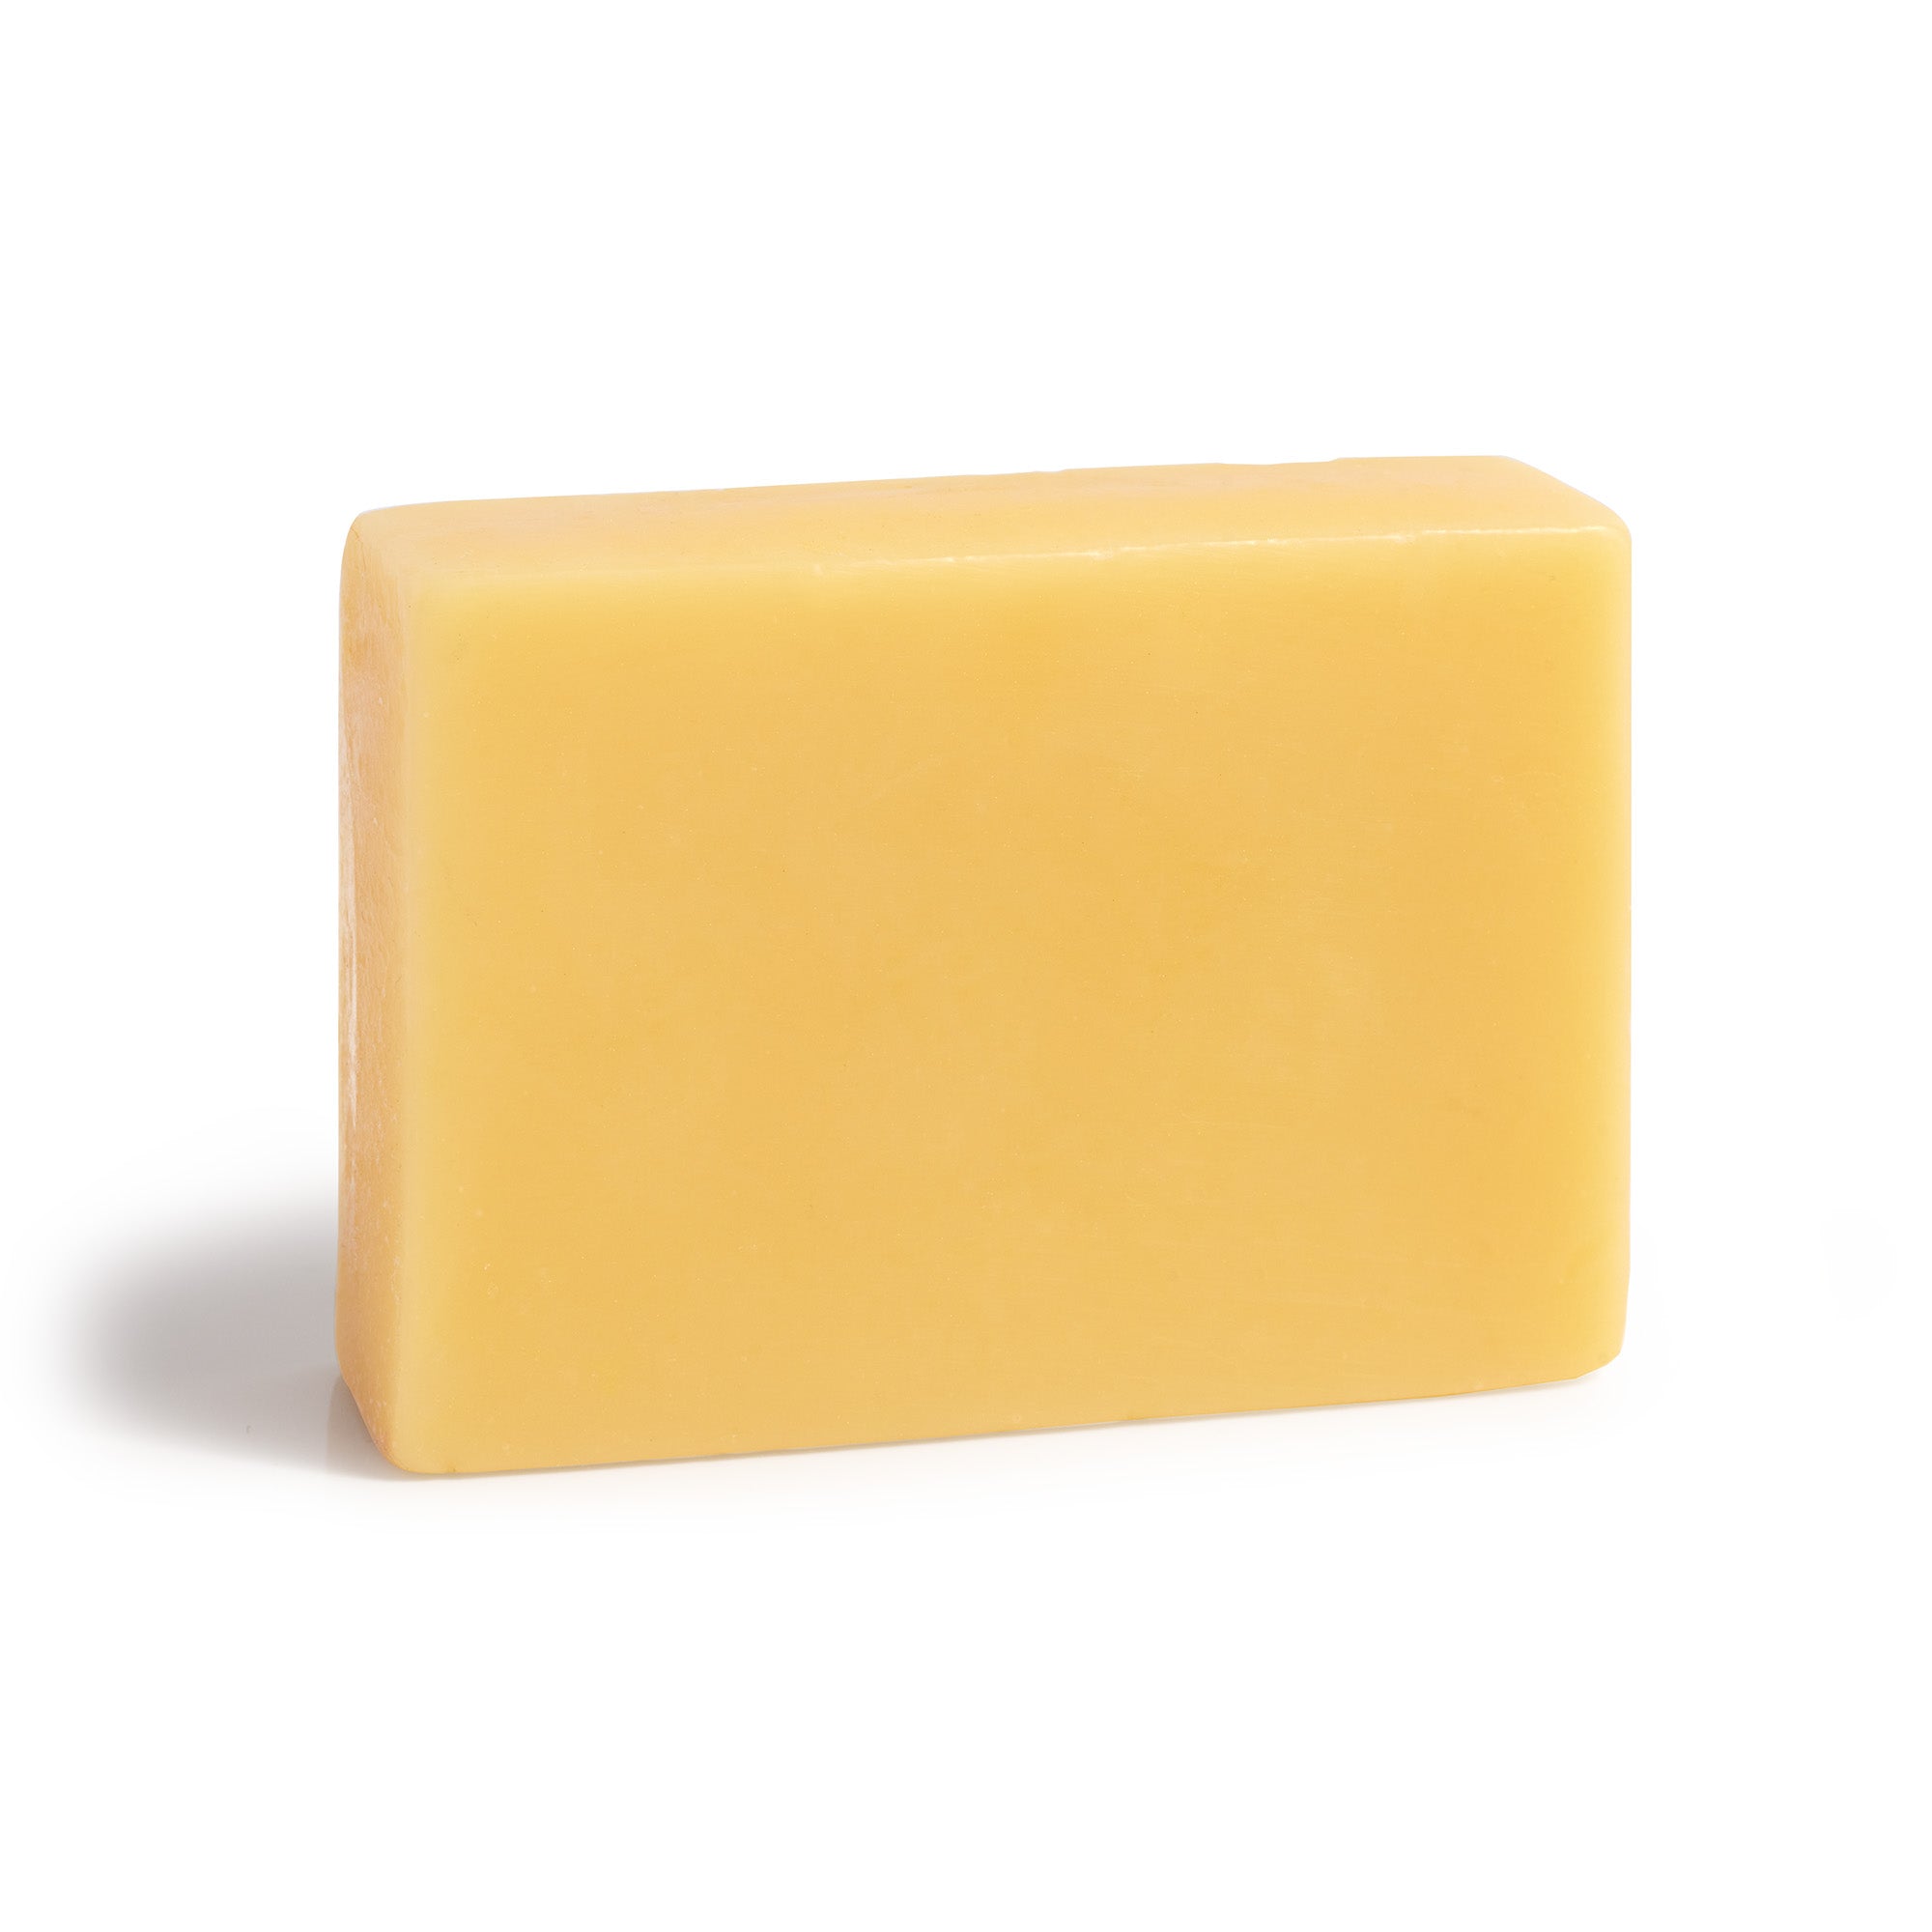 Marula muscle relief soap